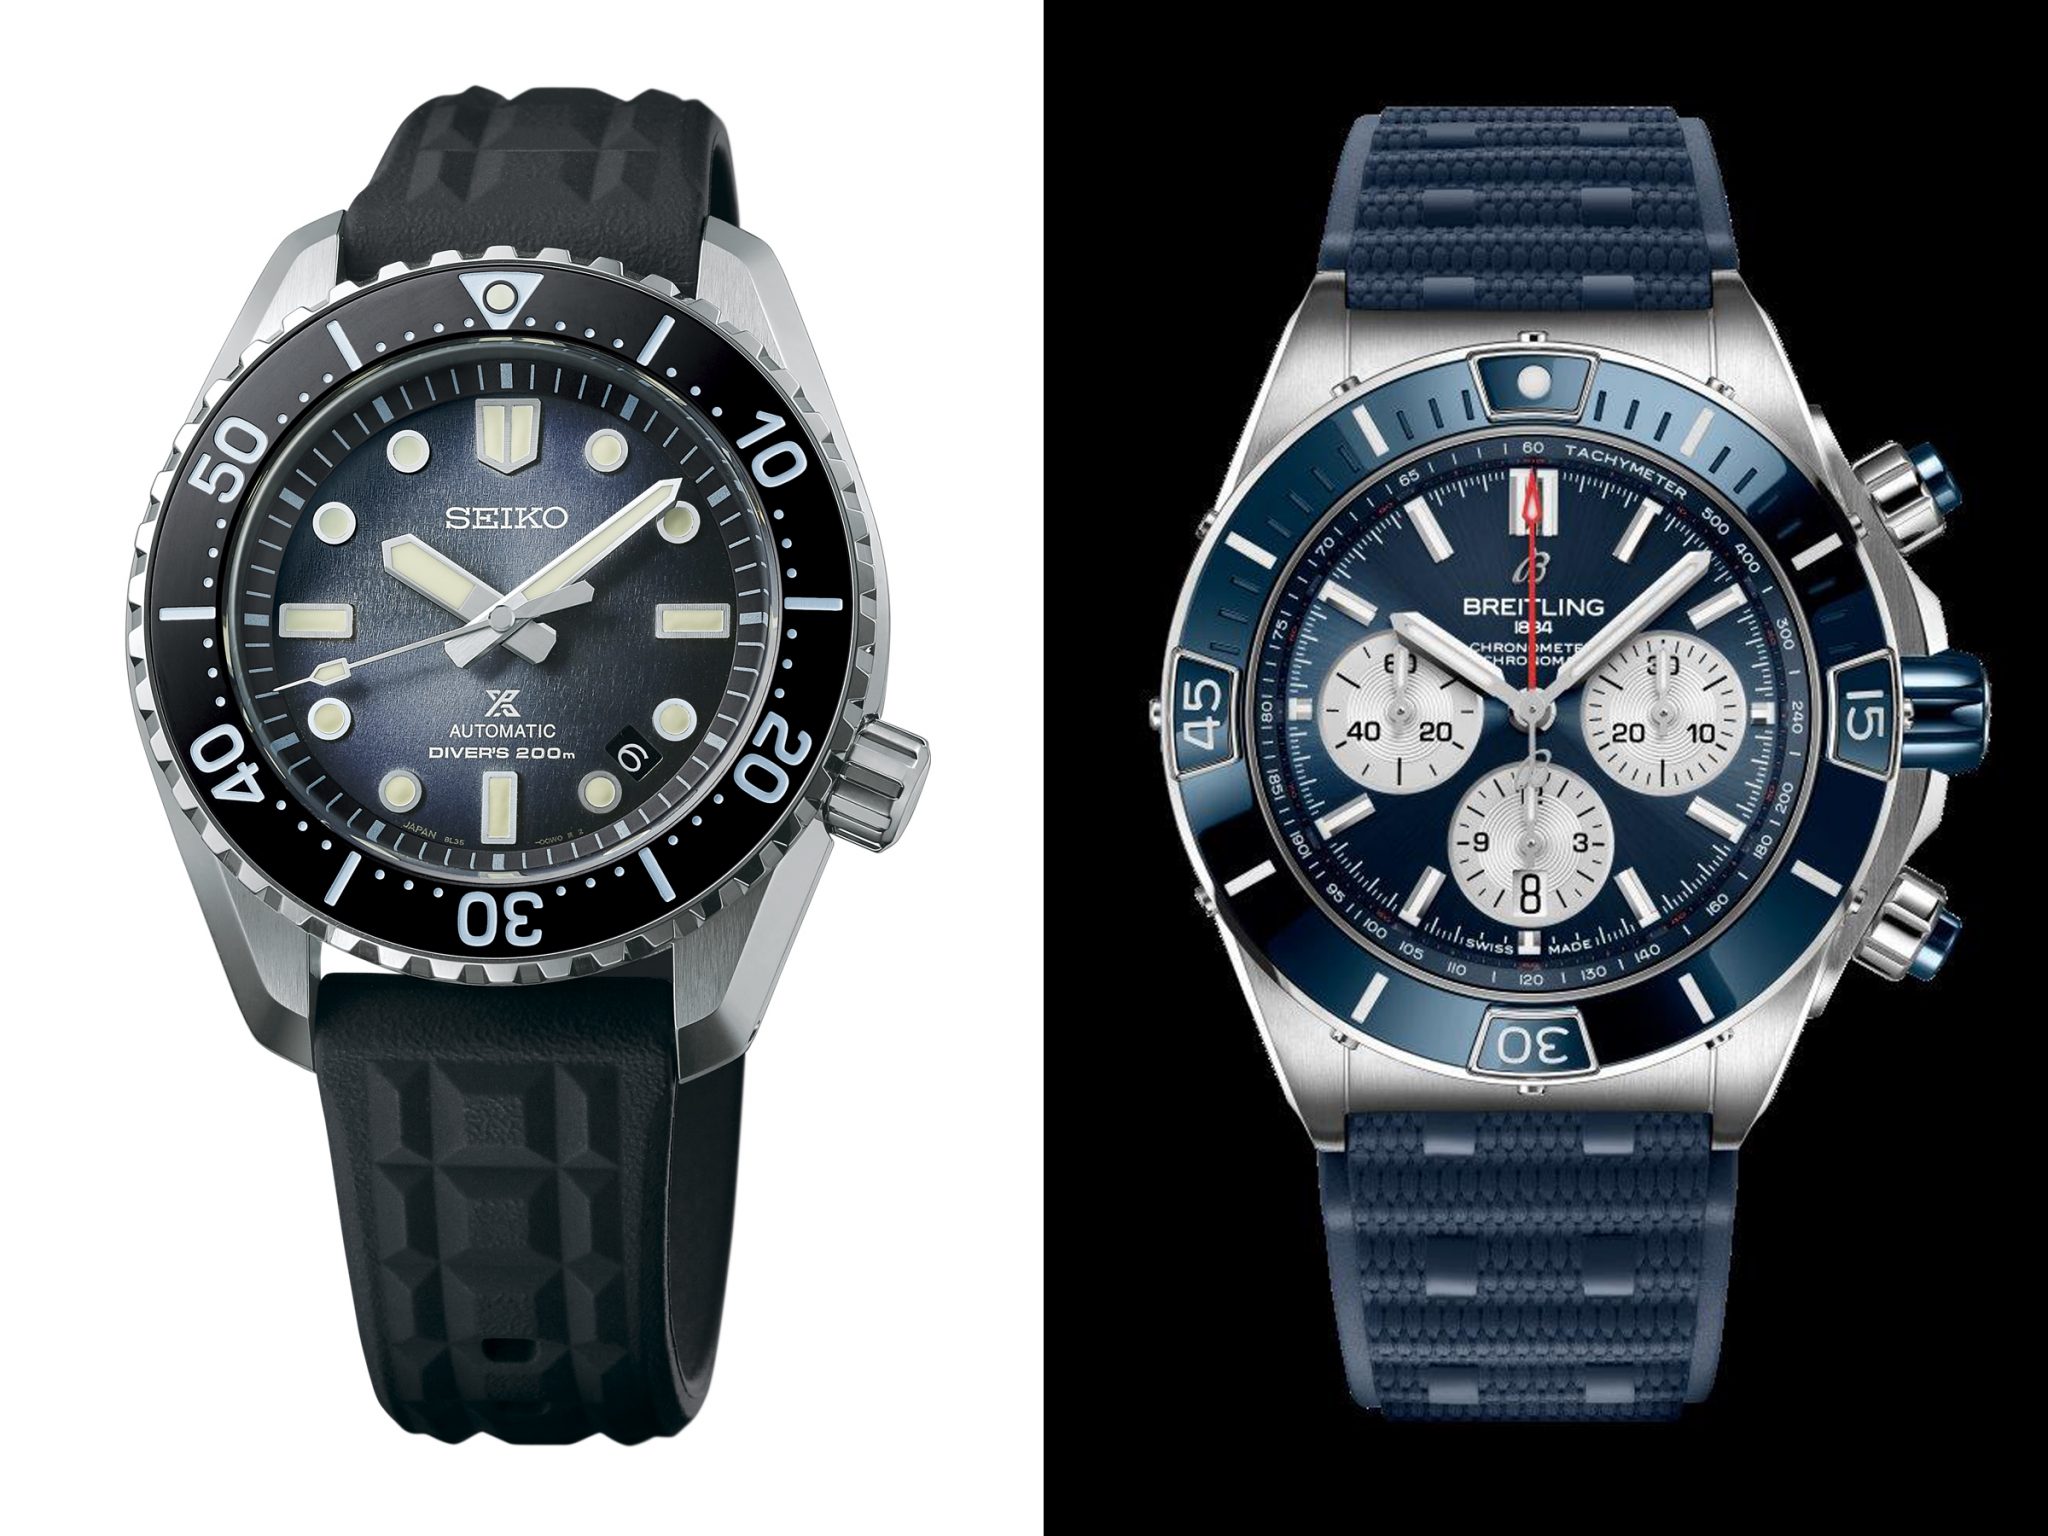 Top 10 Most Popular Watches In The First Half Of 2016